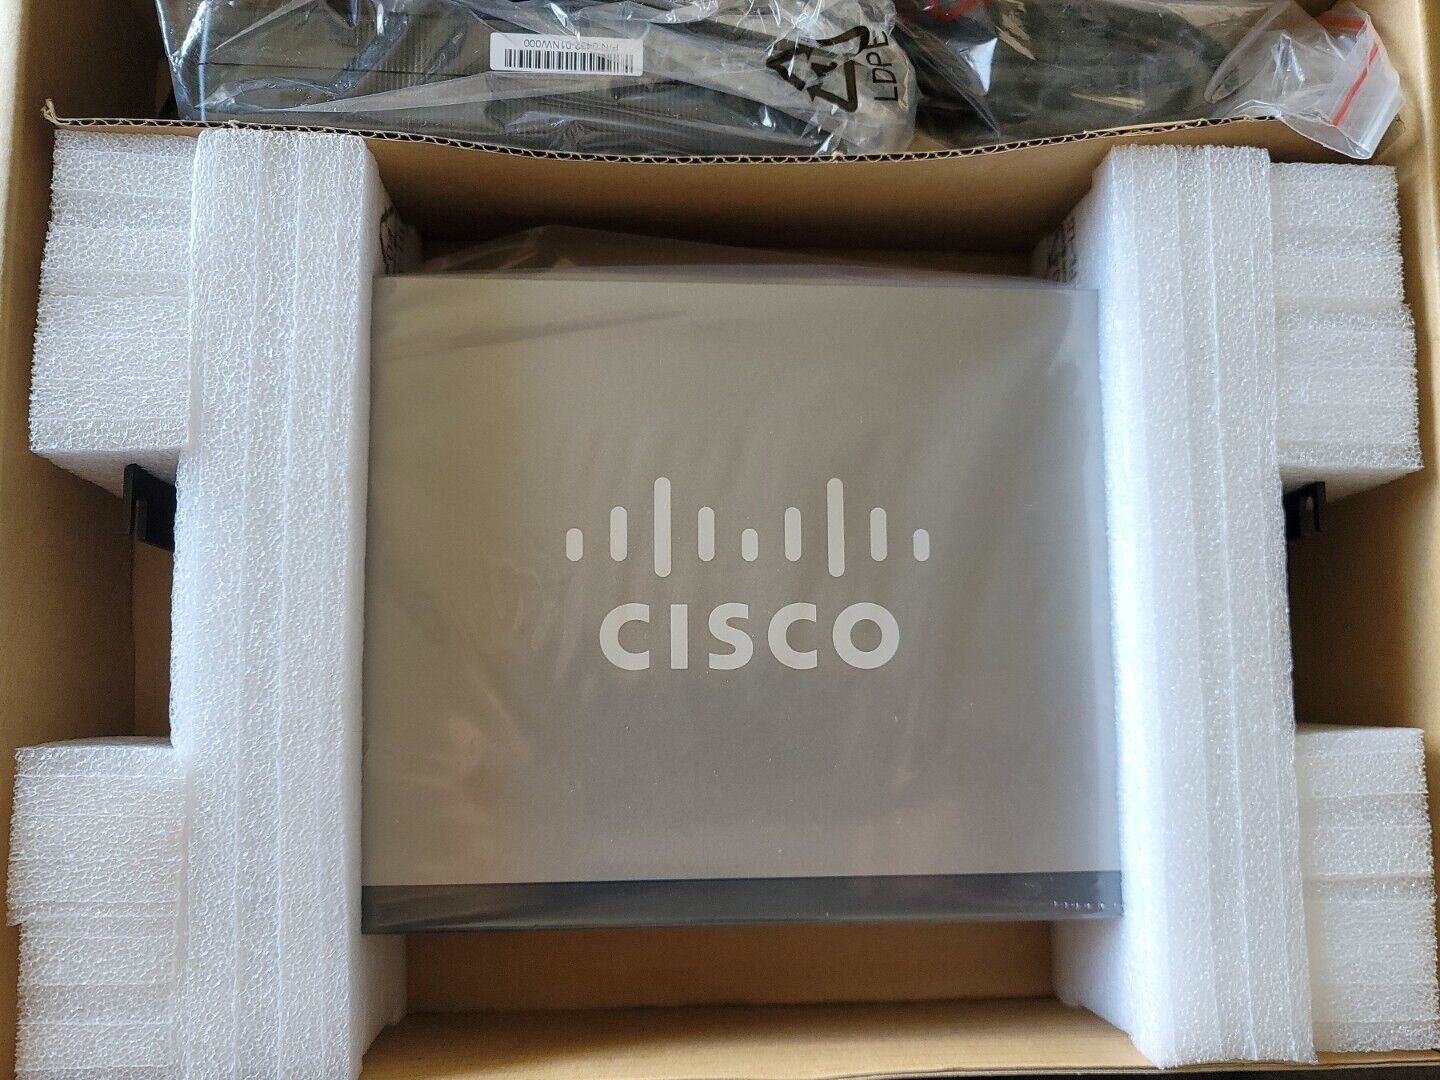 CISCO SF302-08P 8-PORT 10/100 POE MANAGED SWITCH, with power, mount, manual